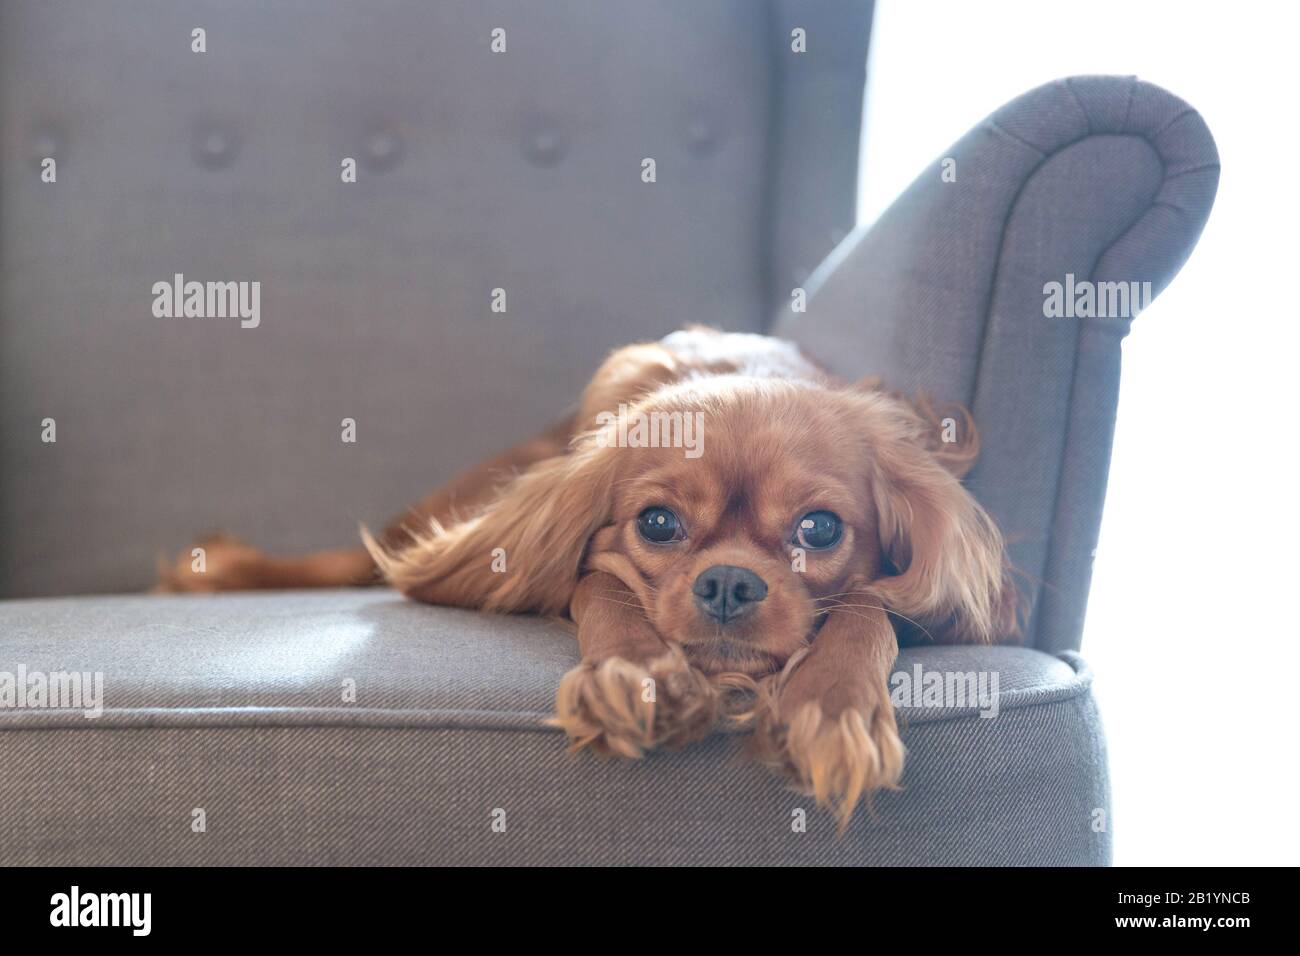 Cute dog relaxing on the armchair Stock Photo